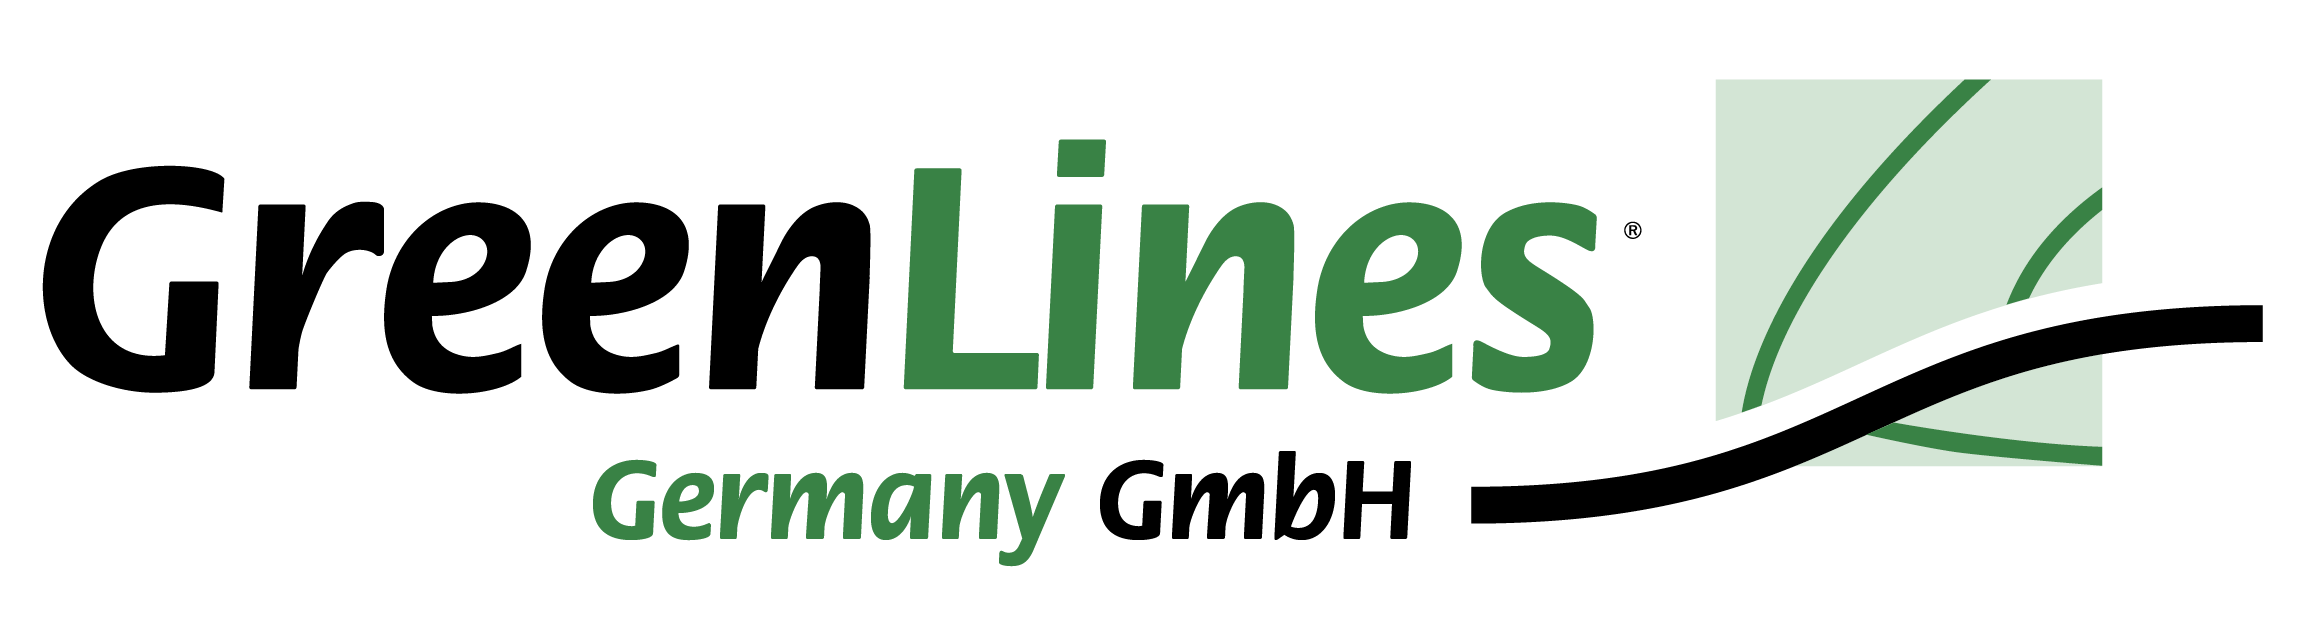 Greenlines_Germay_GmbH